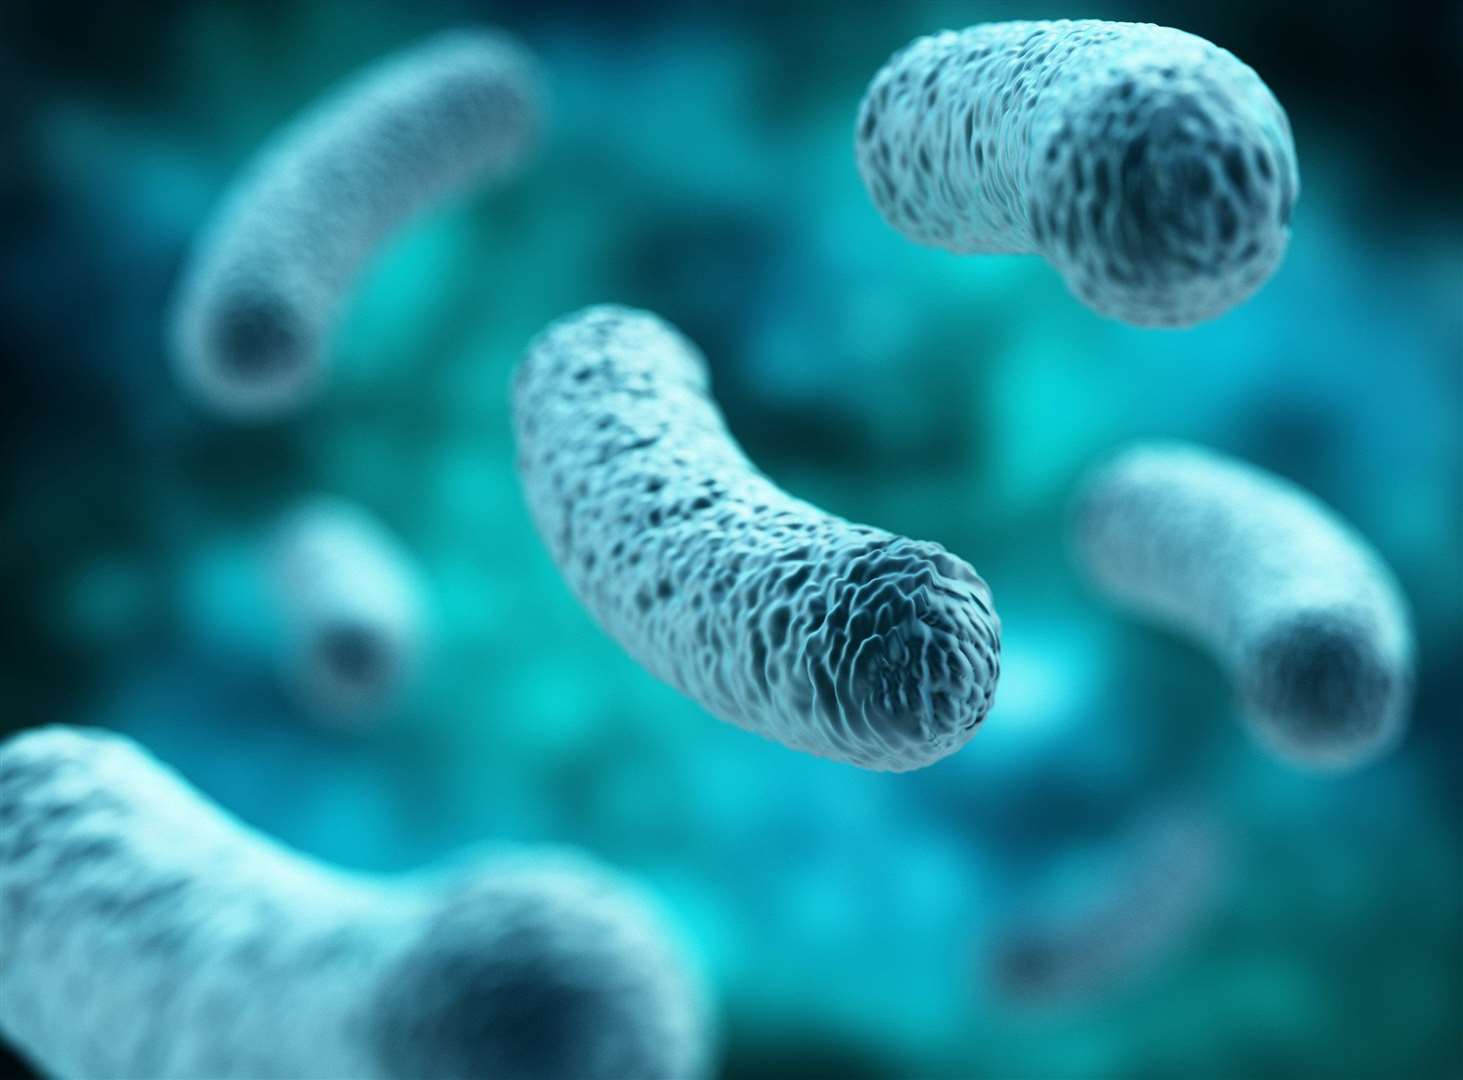 Food poisoning can prove dangerous to the very young, elderly and those with weakened immune systems. Image: Stock photo.